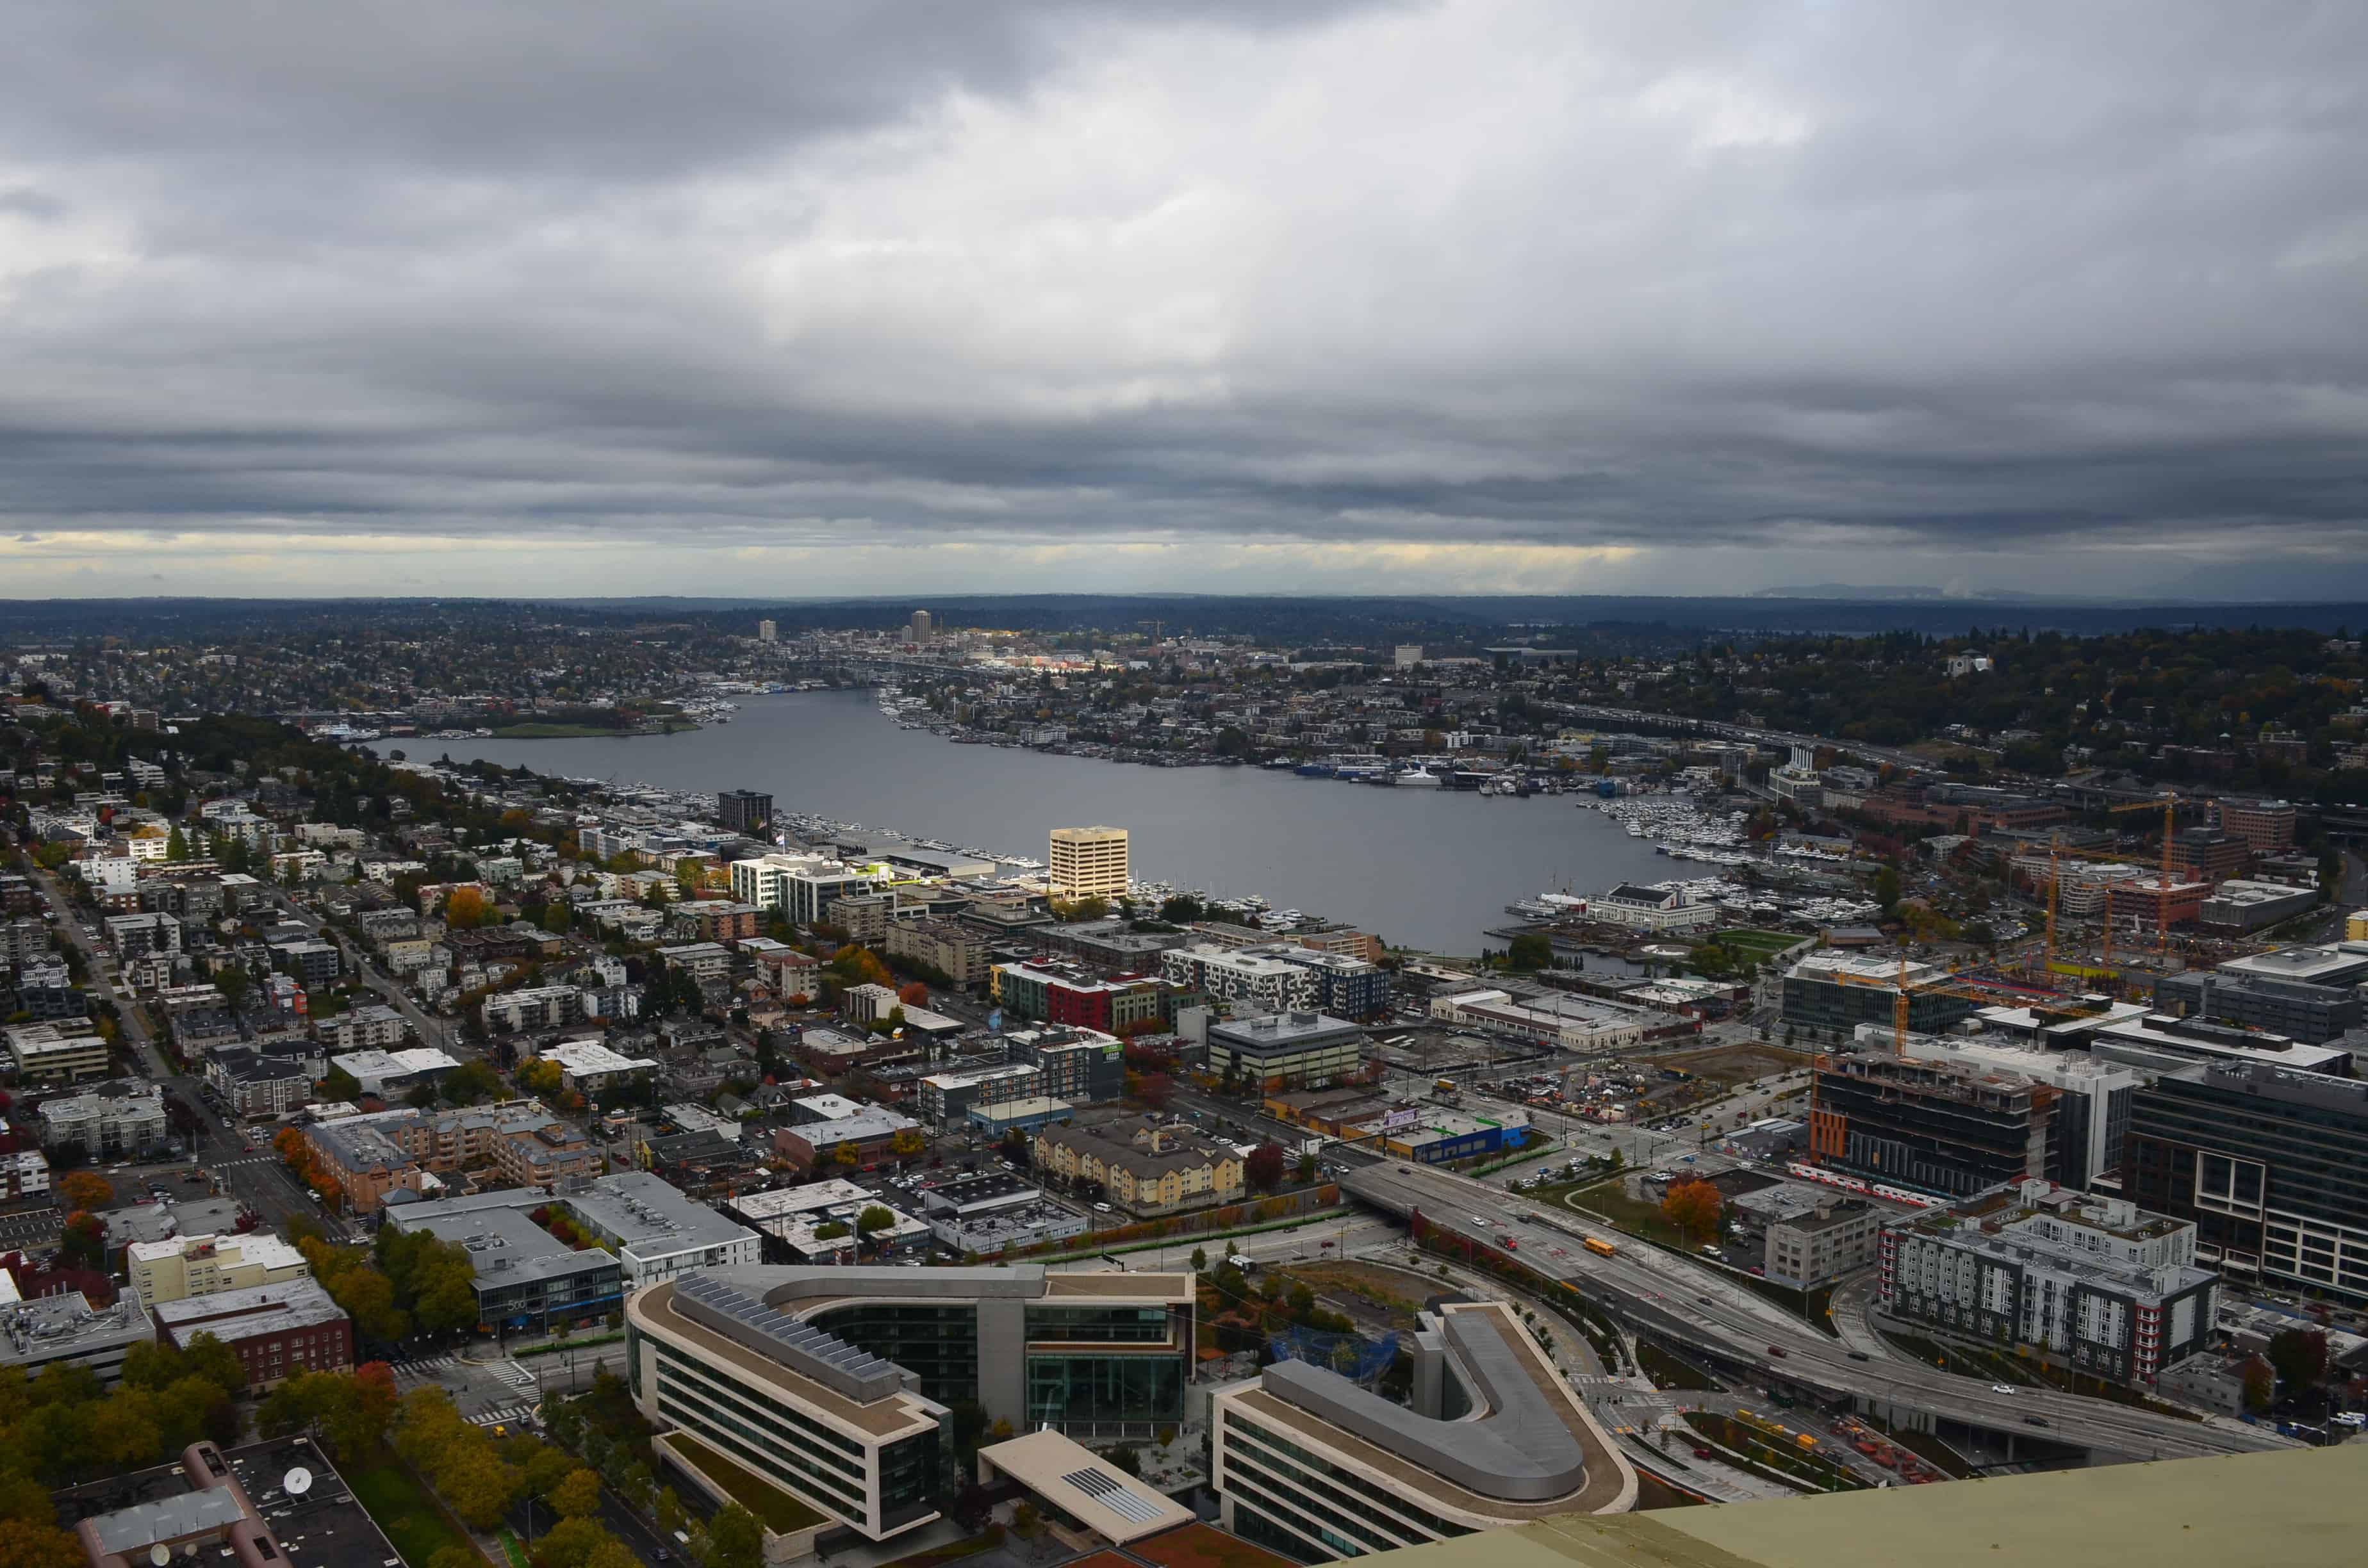 The view from the Space Needle in Seattle, Washington